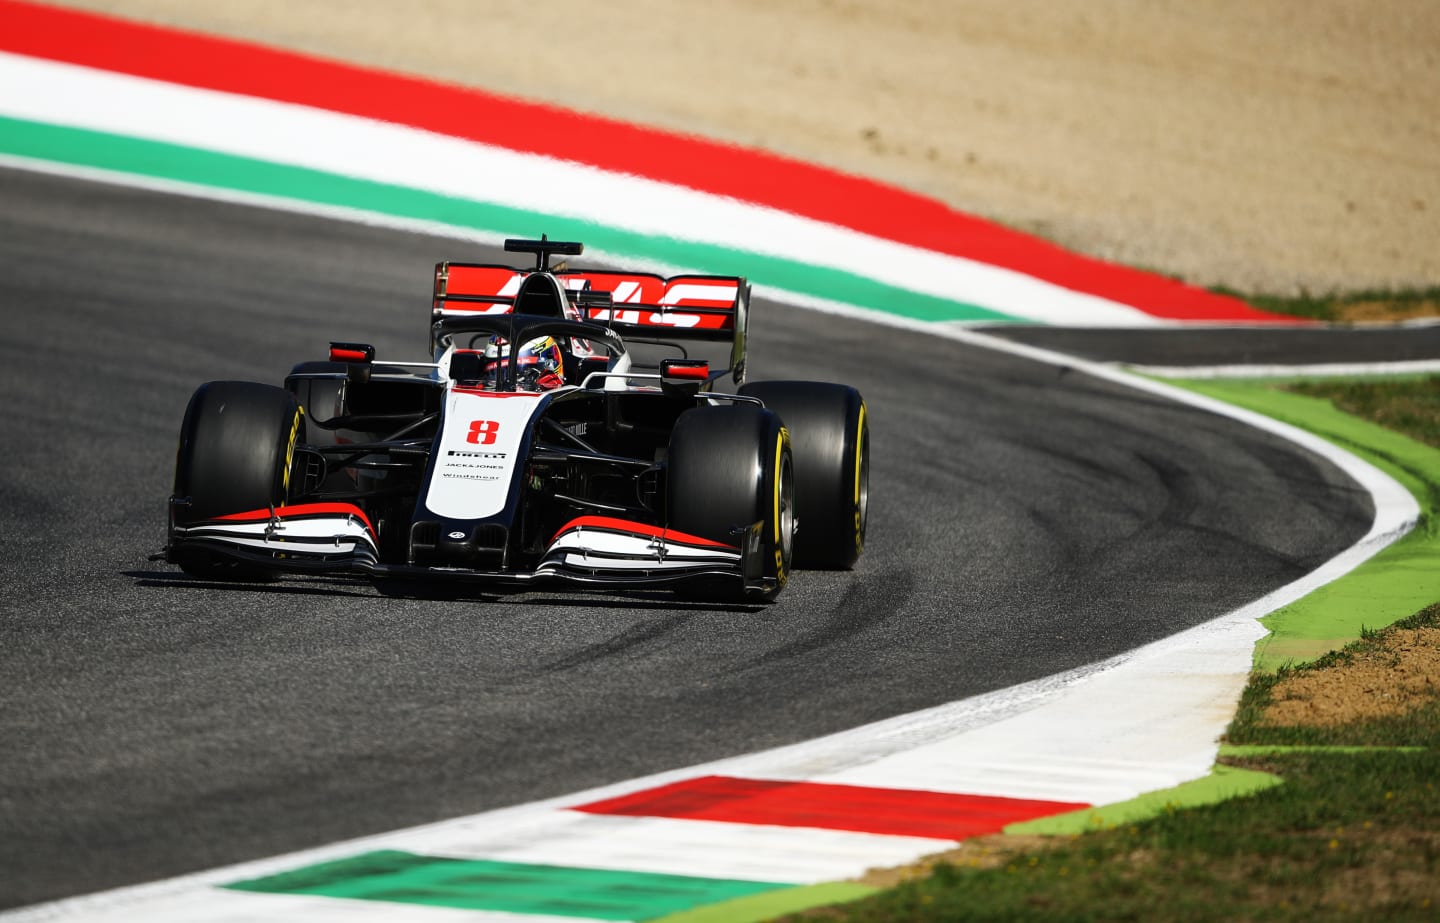 SCARPERIA, ITALY - SEPTEMBER 12: Romain Grosjean of France driving the (8) Haas F1 Team VF-20 Ferrari on track during final practice ahead of the F1 Grand Prix of Tuscany at Mugello Circuit on September 12, 2020 in Scarperia, Italy. (Photo by Bryn Lennon/Getty Images)